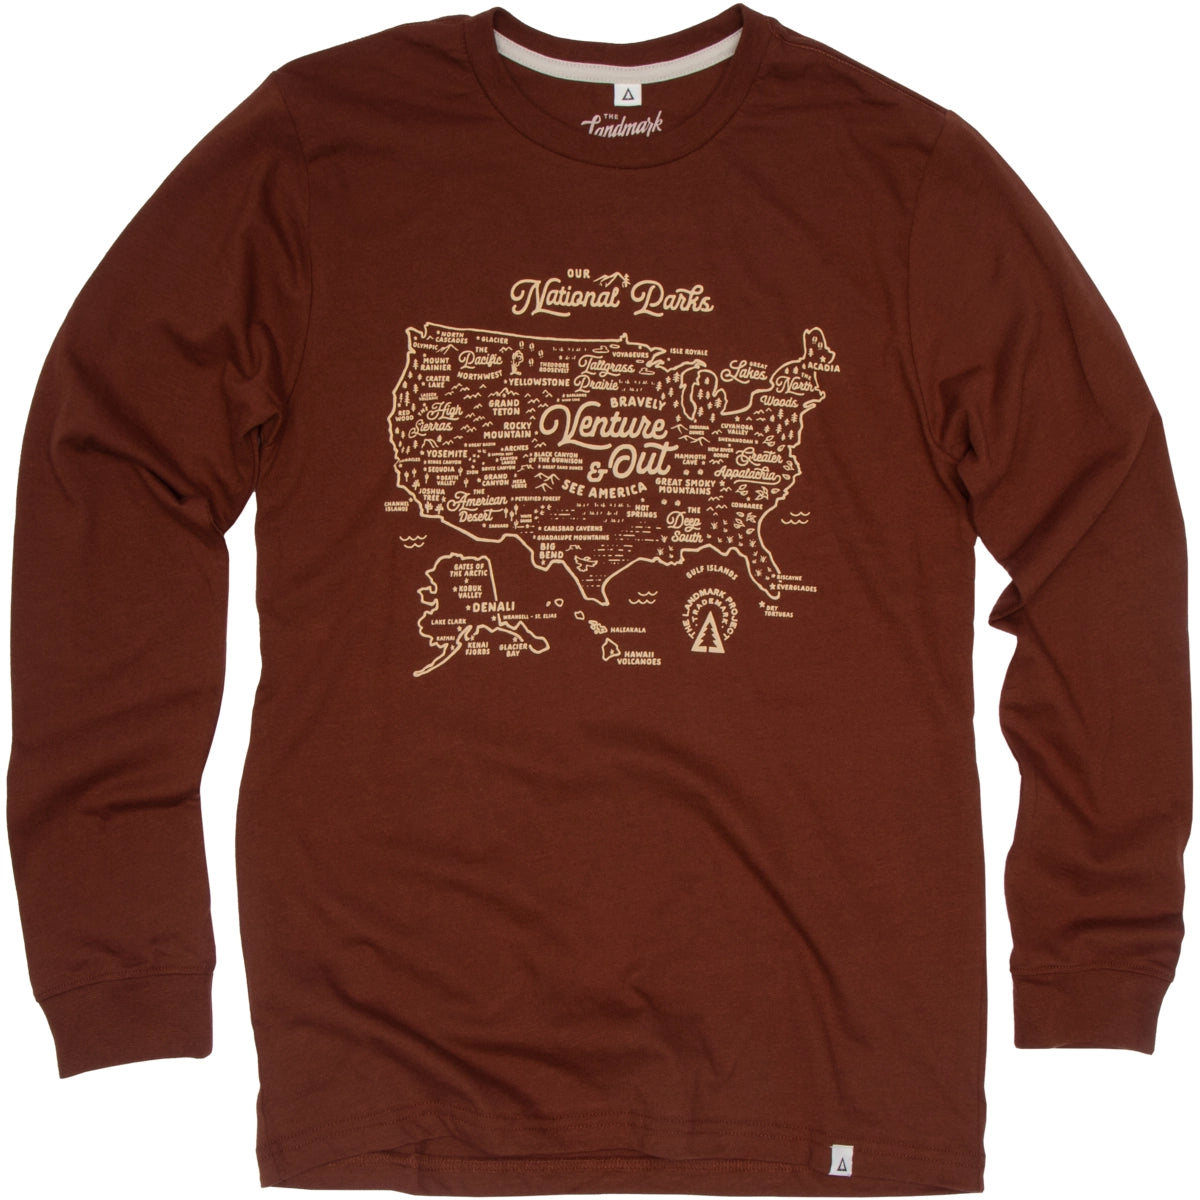 NATIONAL PARKS LONG SLEEVE